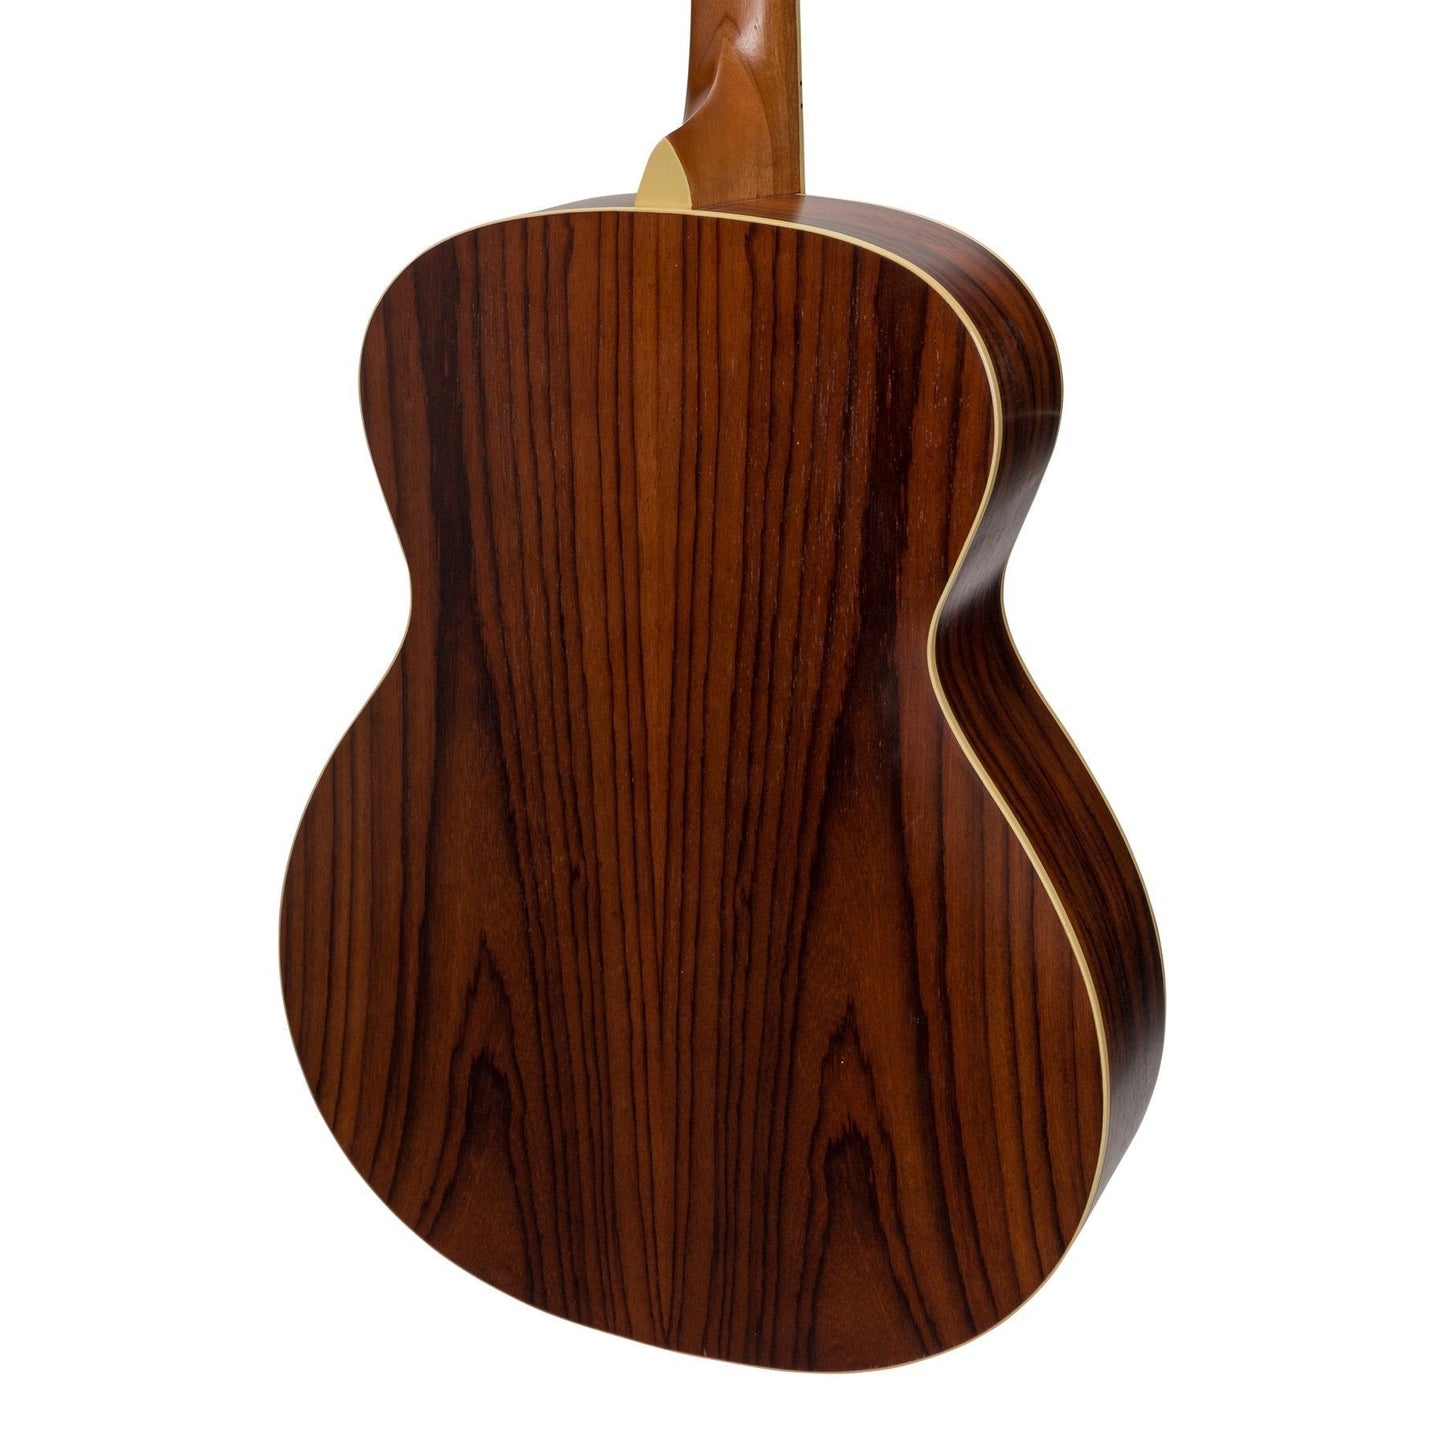 Sanchez Acoustic Small Body Guitar (Spruce/Rosewood)